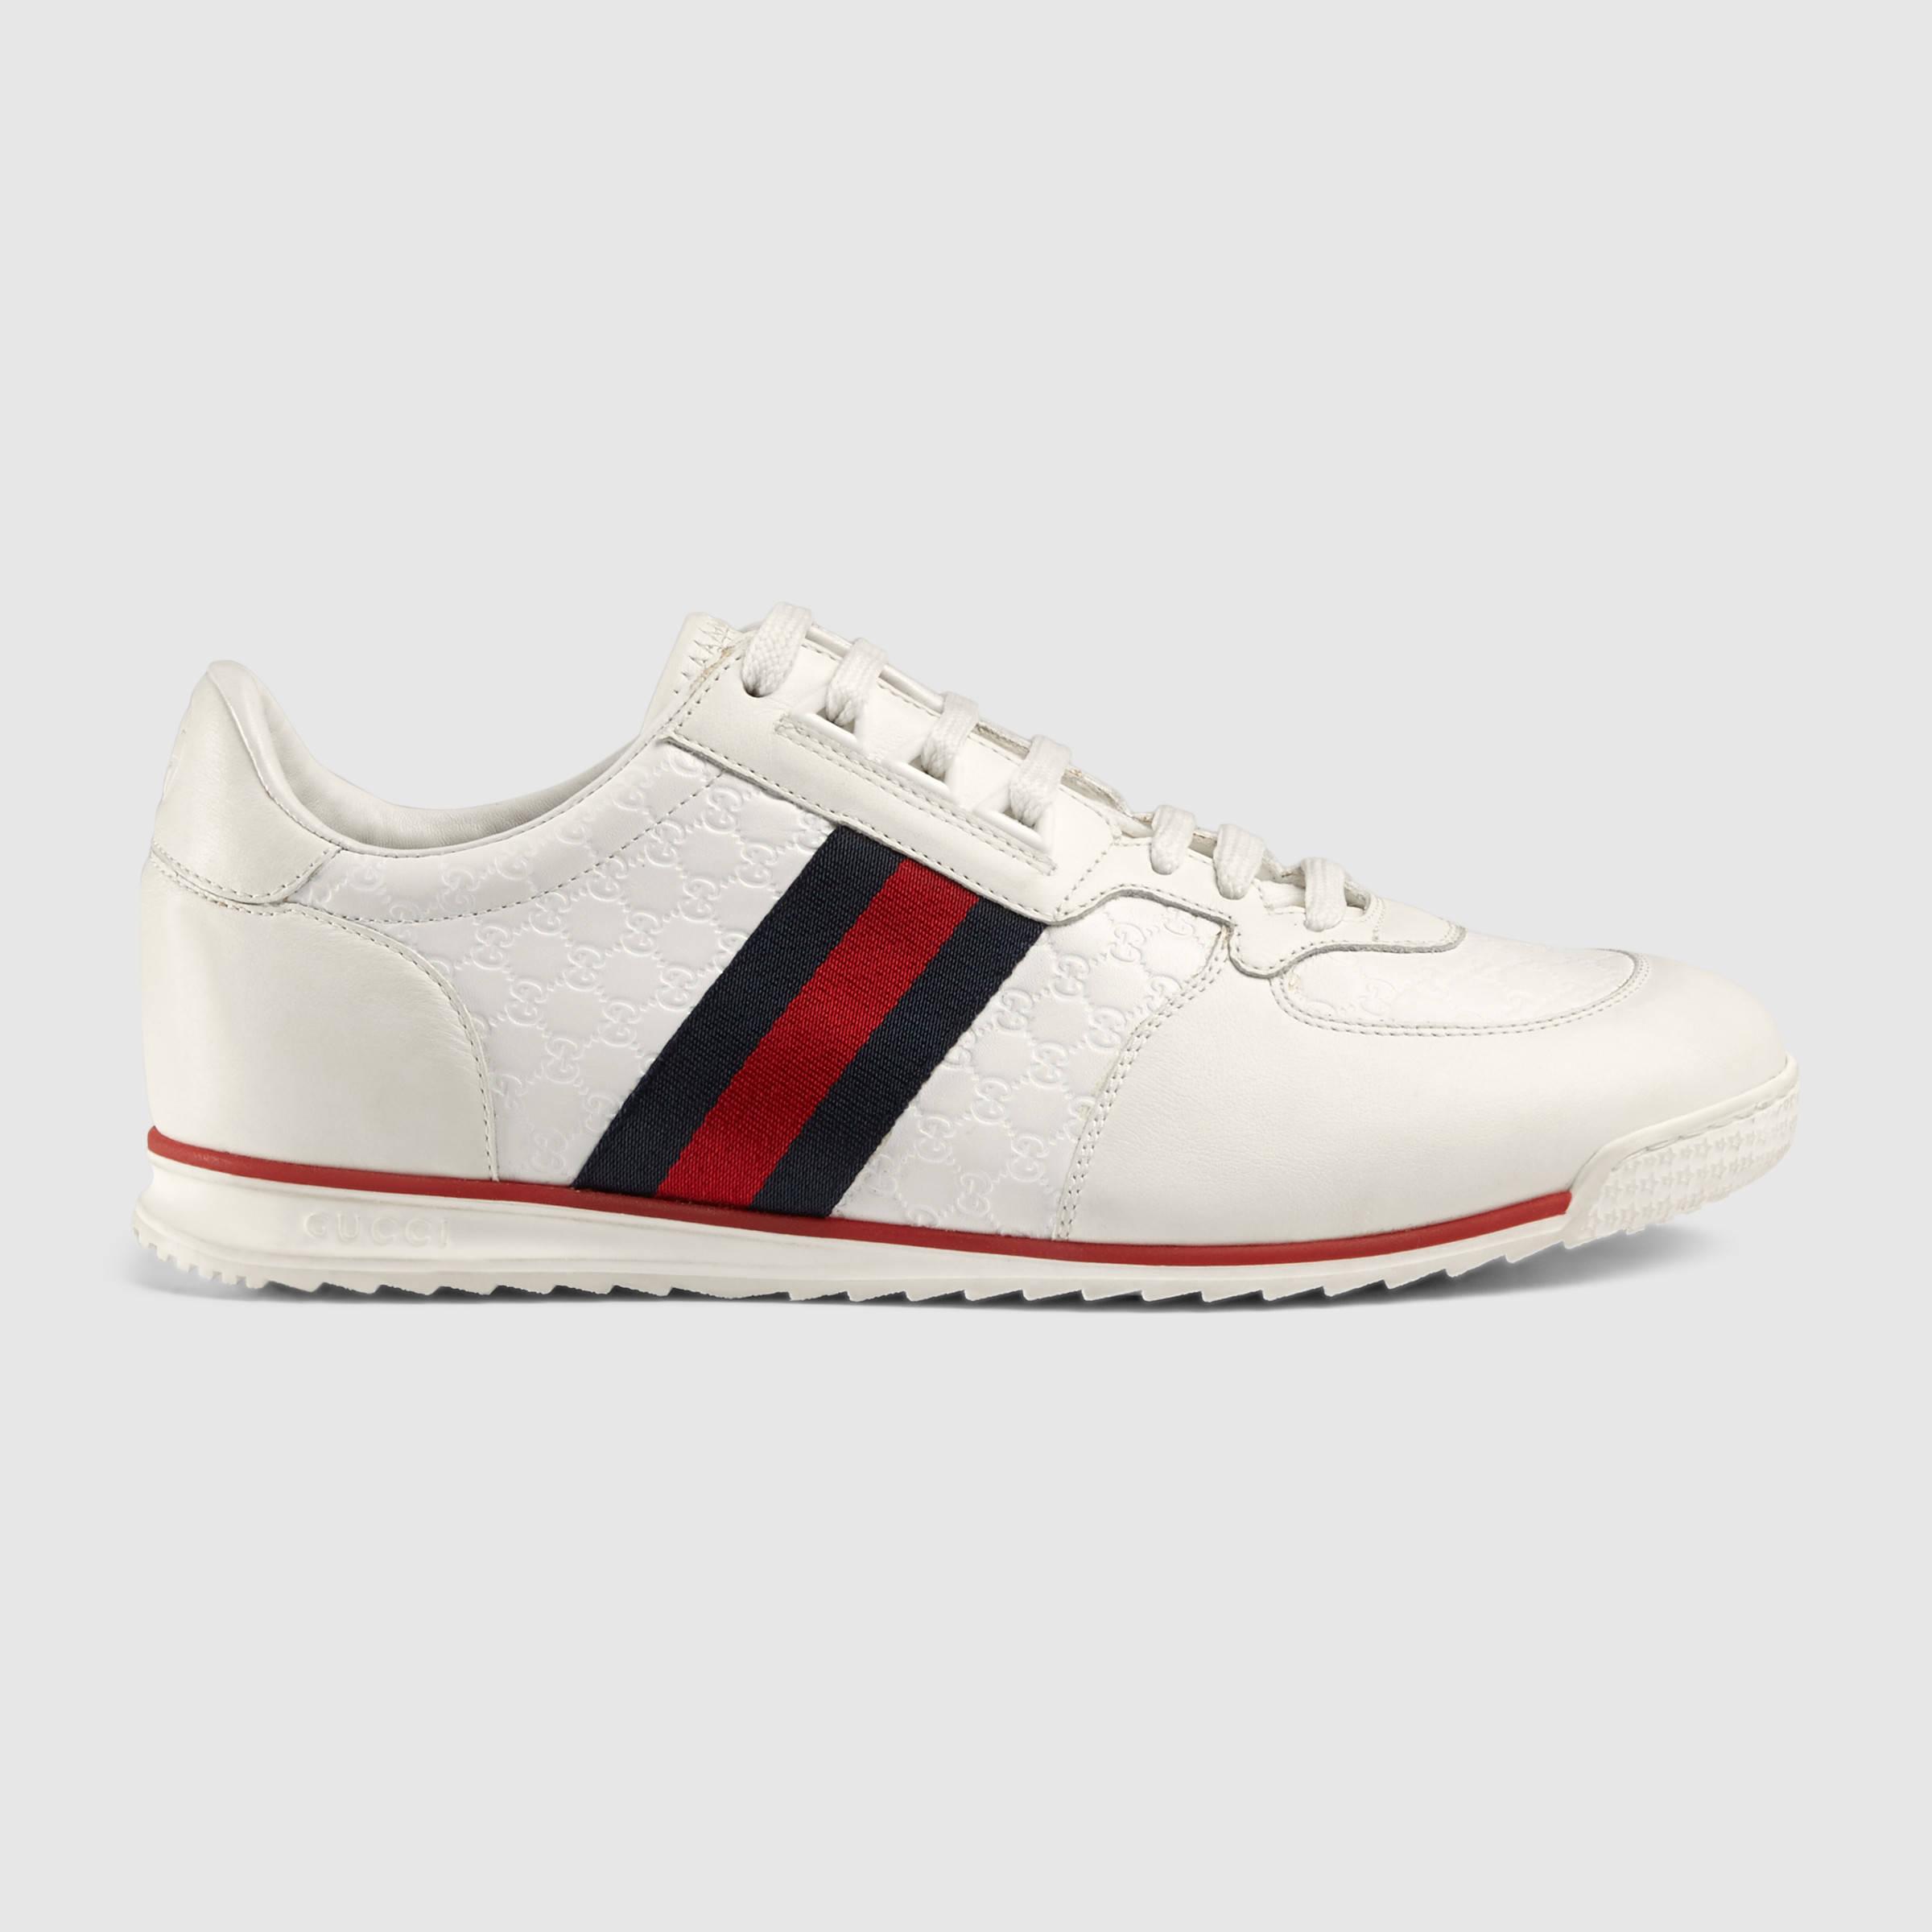 Lyst - Gucci Leather Sneaker With Web in White for Men